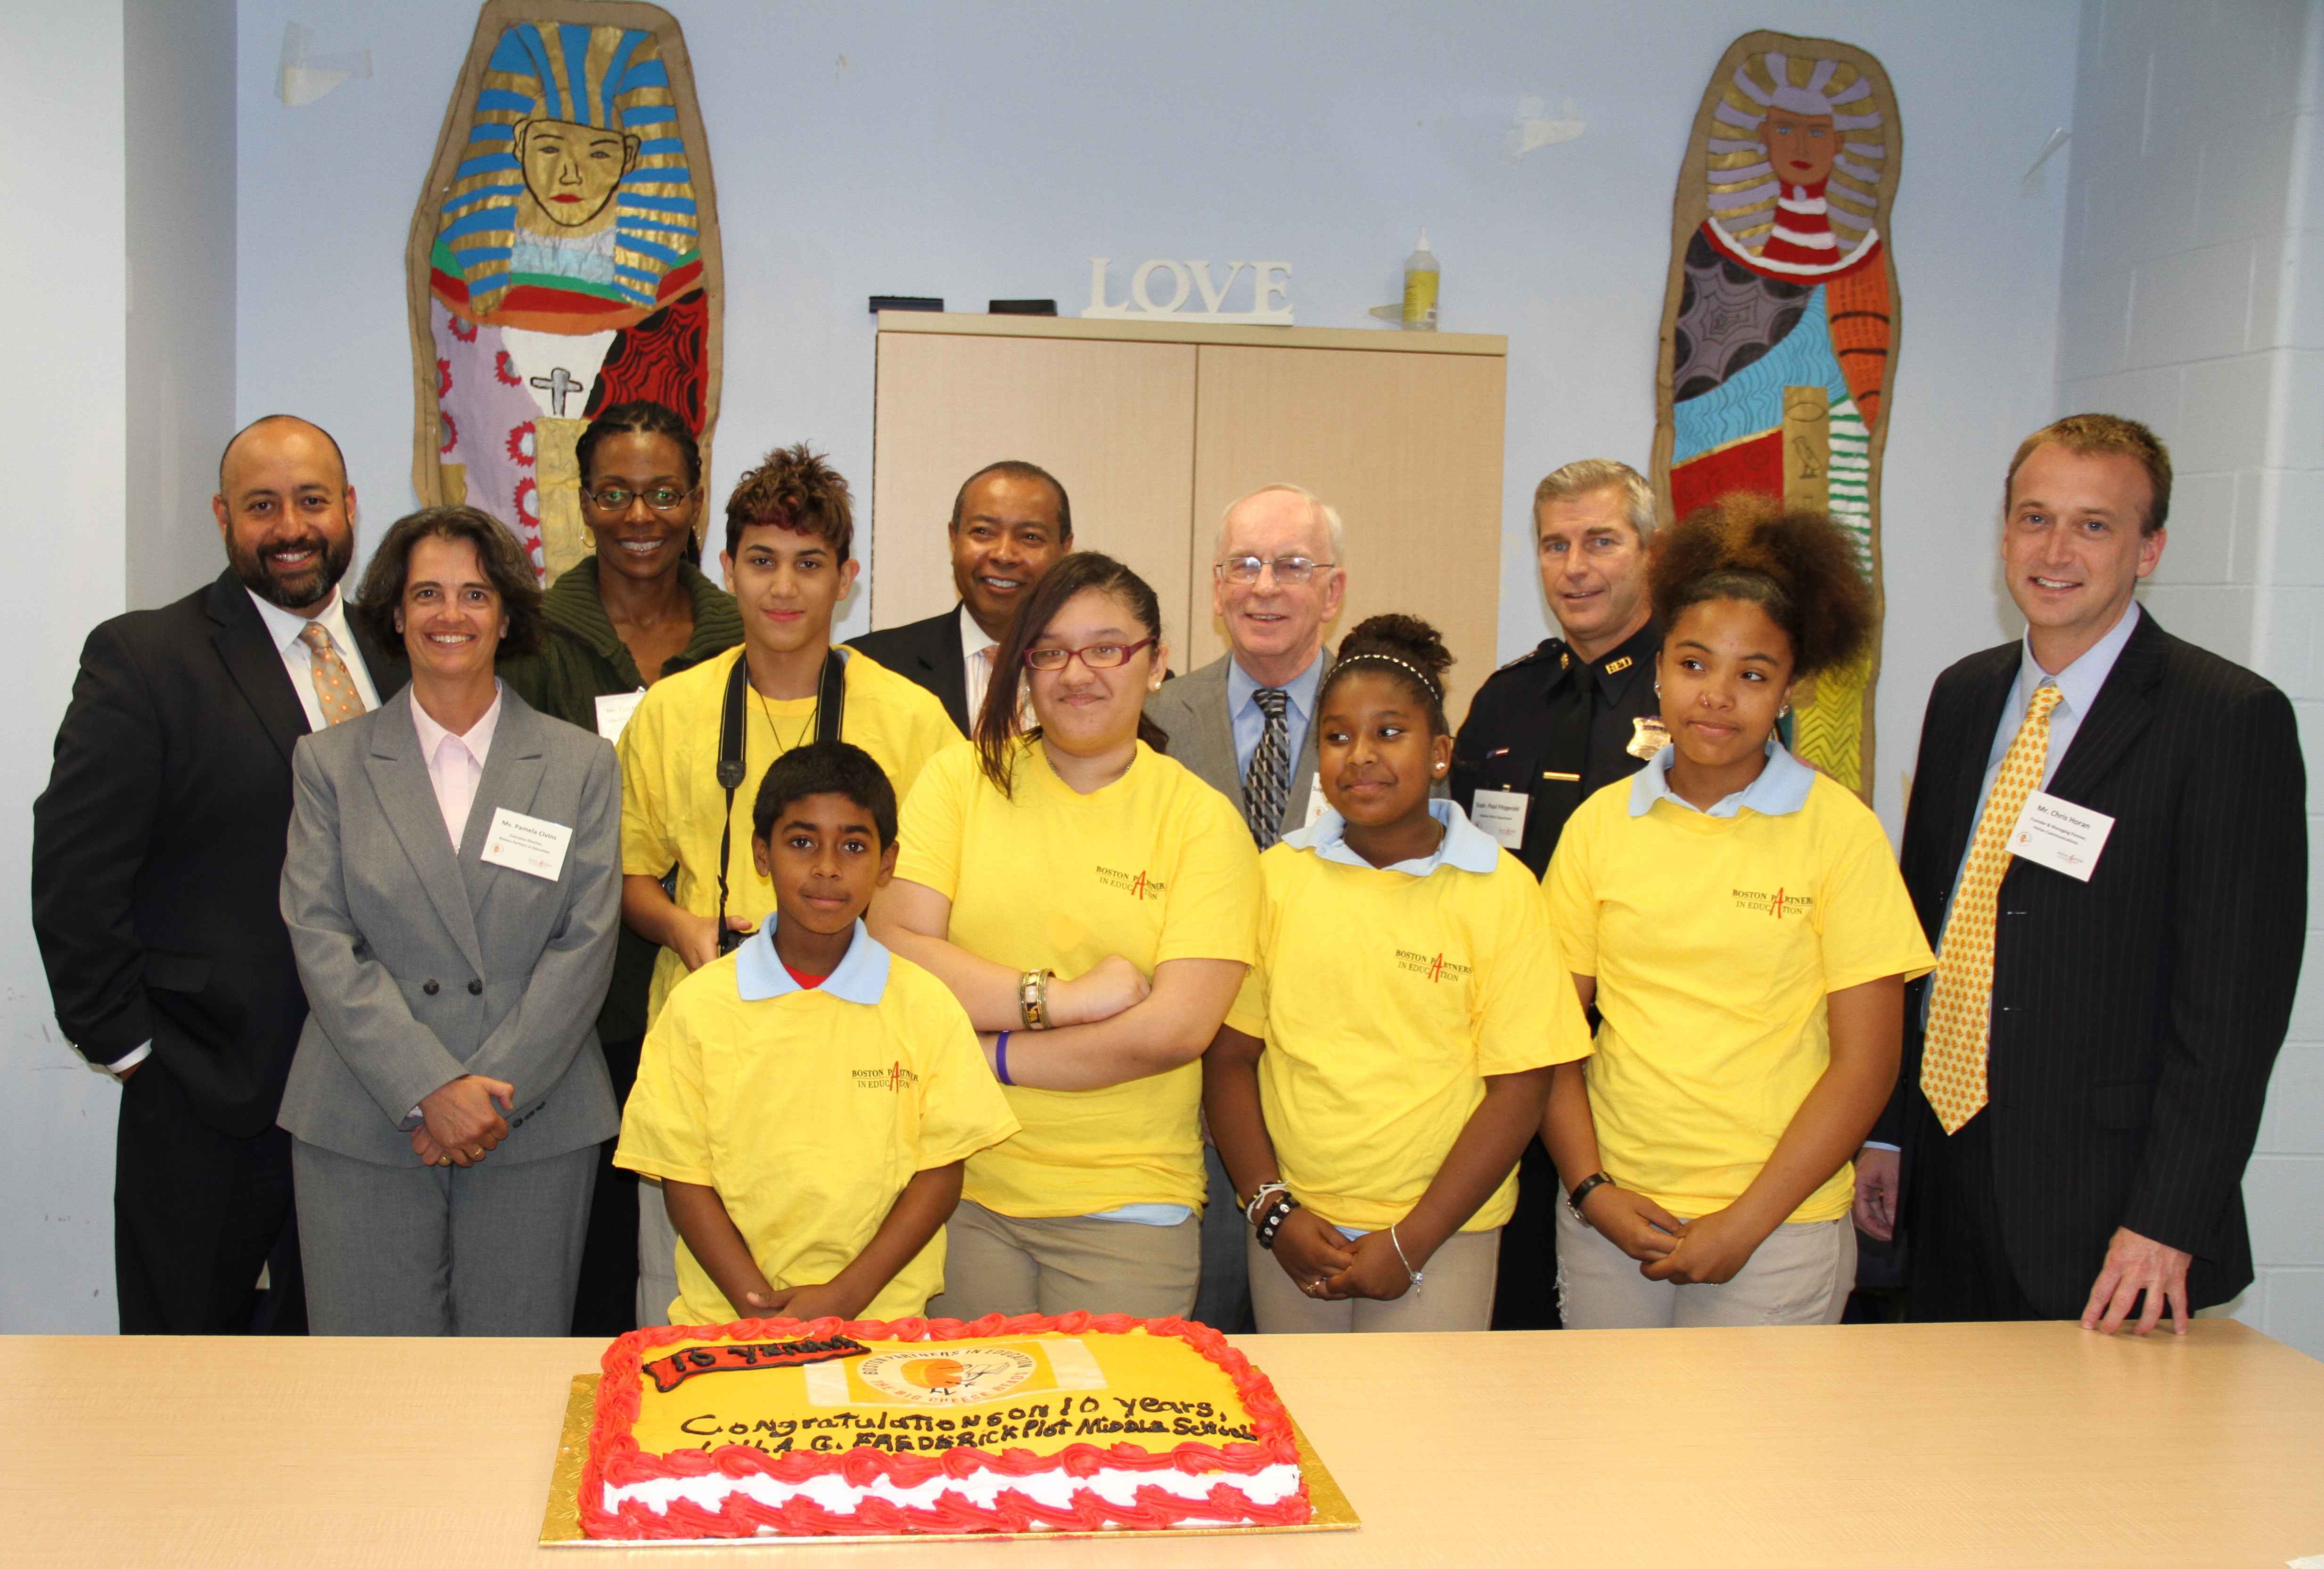 10th Anniversary kick-off party on 10/10/13 at the Lilah G. Frederick Middle School in Dorchester